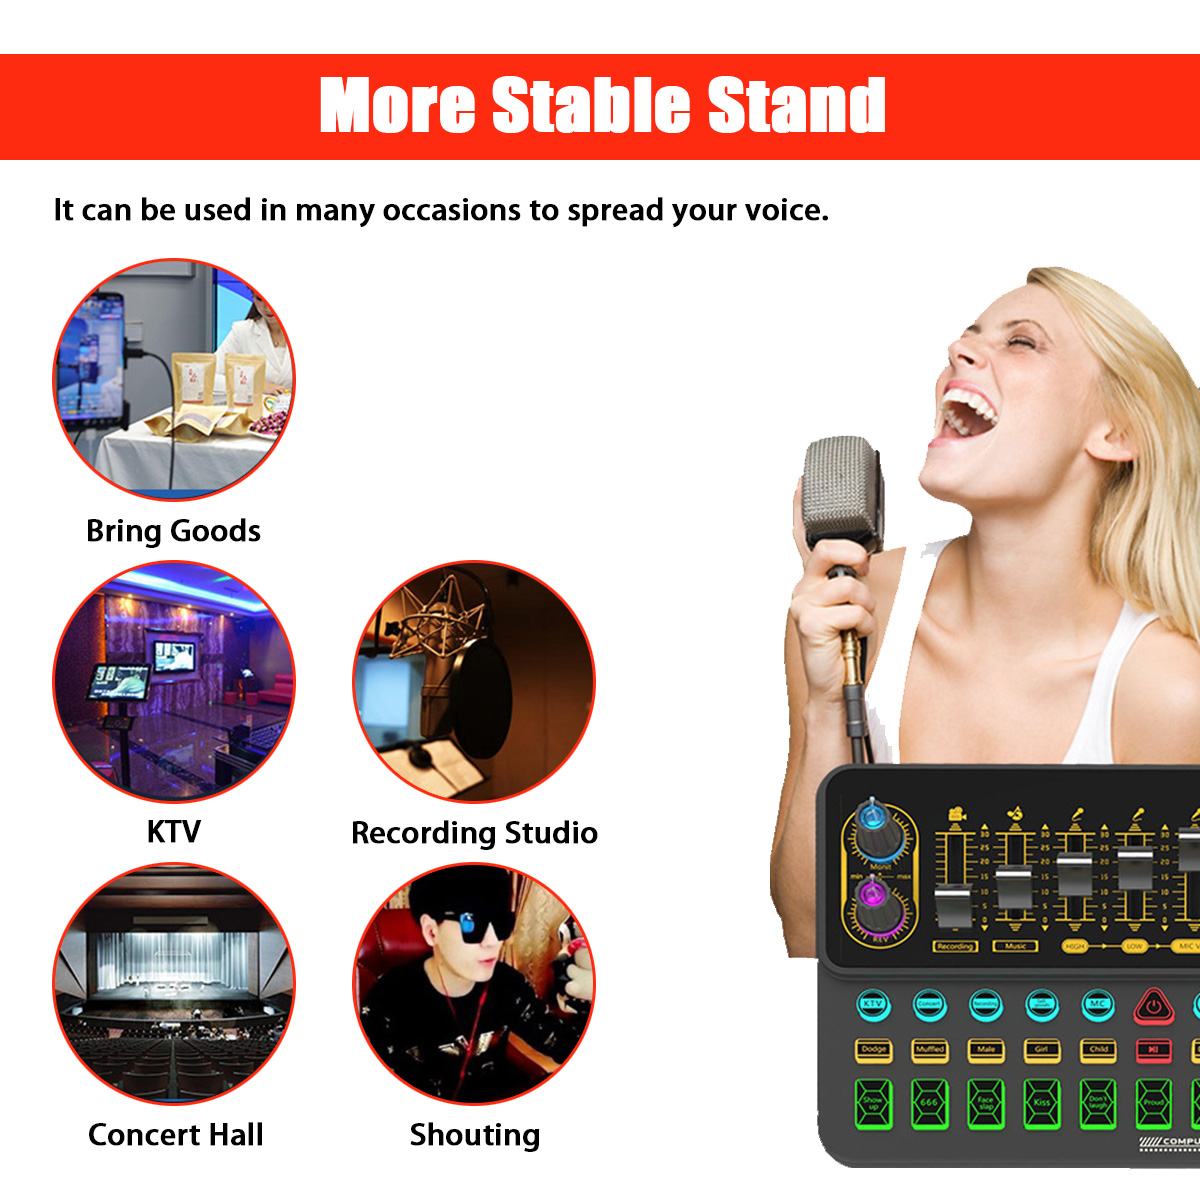 BM-900-Live-Sound-Card-Condenser-Microphone-Set-Recording-Mount-Boom-Stand-Mic-Kit-for-Live-Broadcas-1941464-4